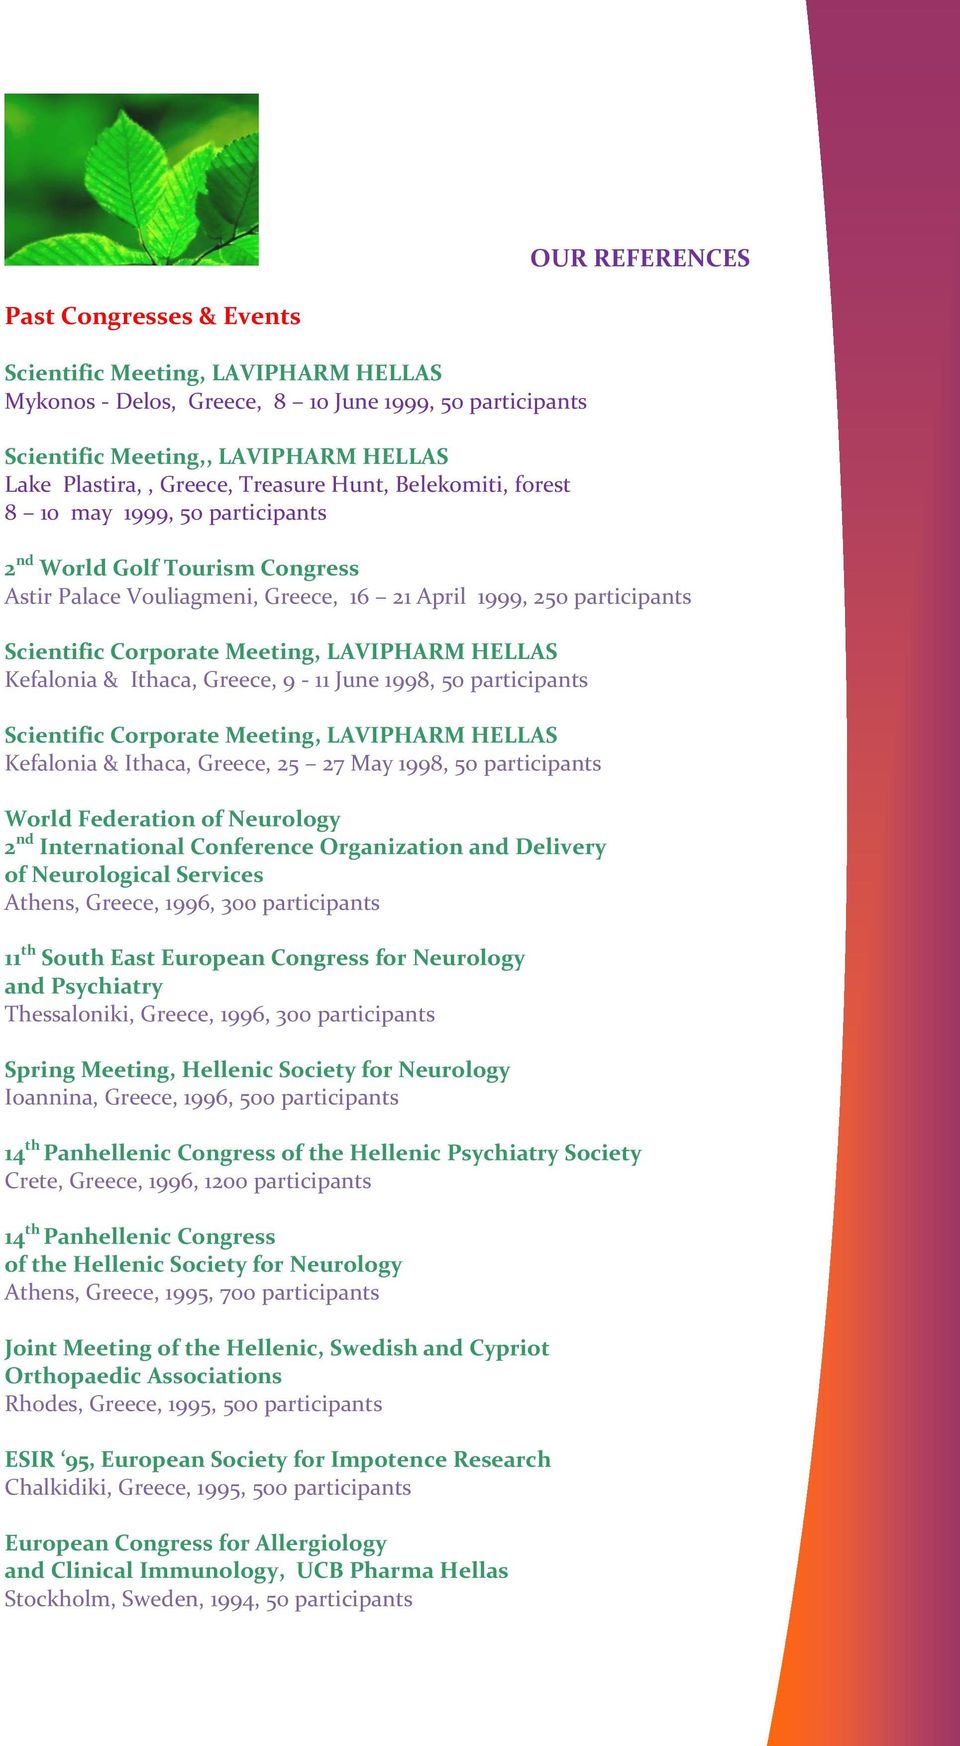 9-11 June 1998, 50 participants Scientific Corporate Meeting, LAVIPHARM HELLAS Kefalonia & Ιthaca, Greece, 25 27 Μay 1998, 50 participants World Federation of Neurology 2 nd International Conference